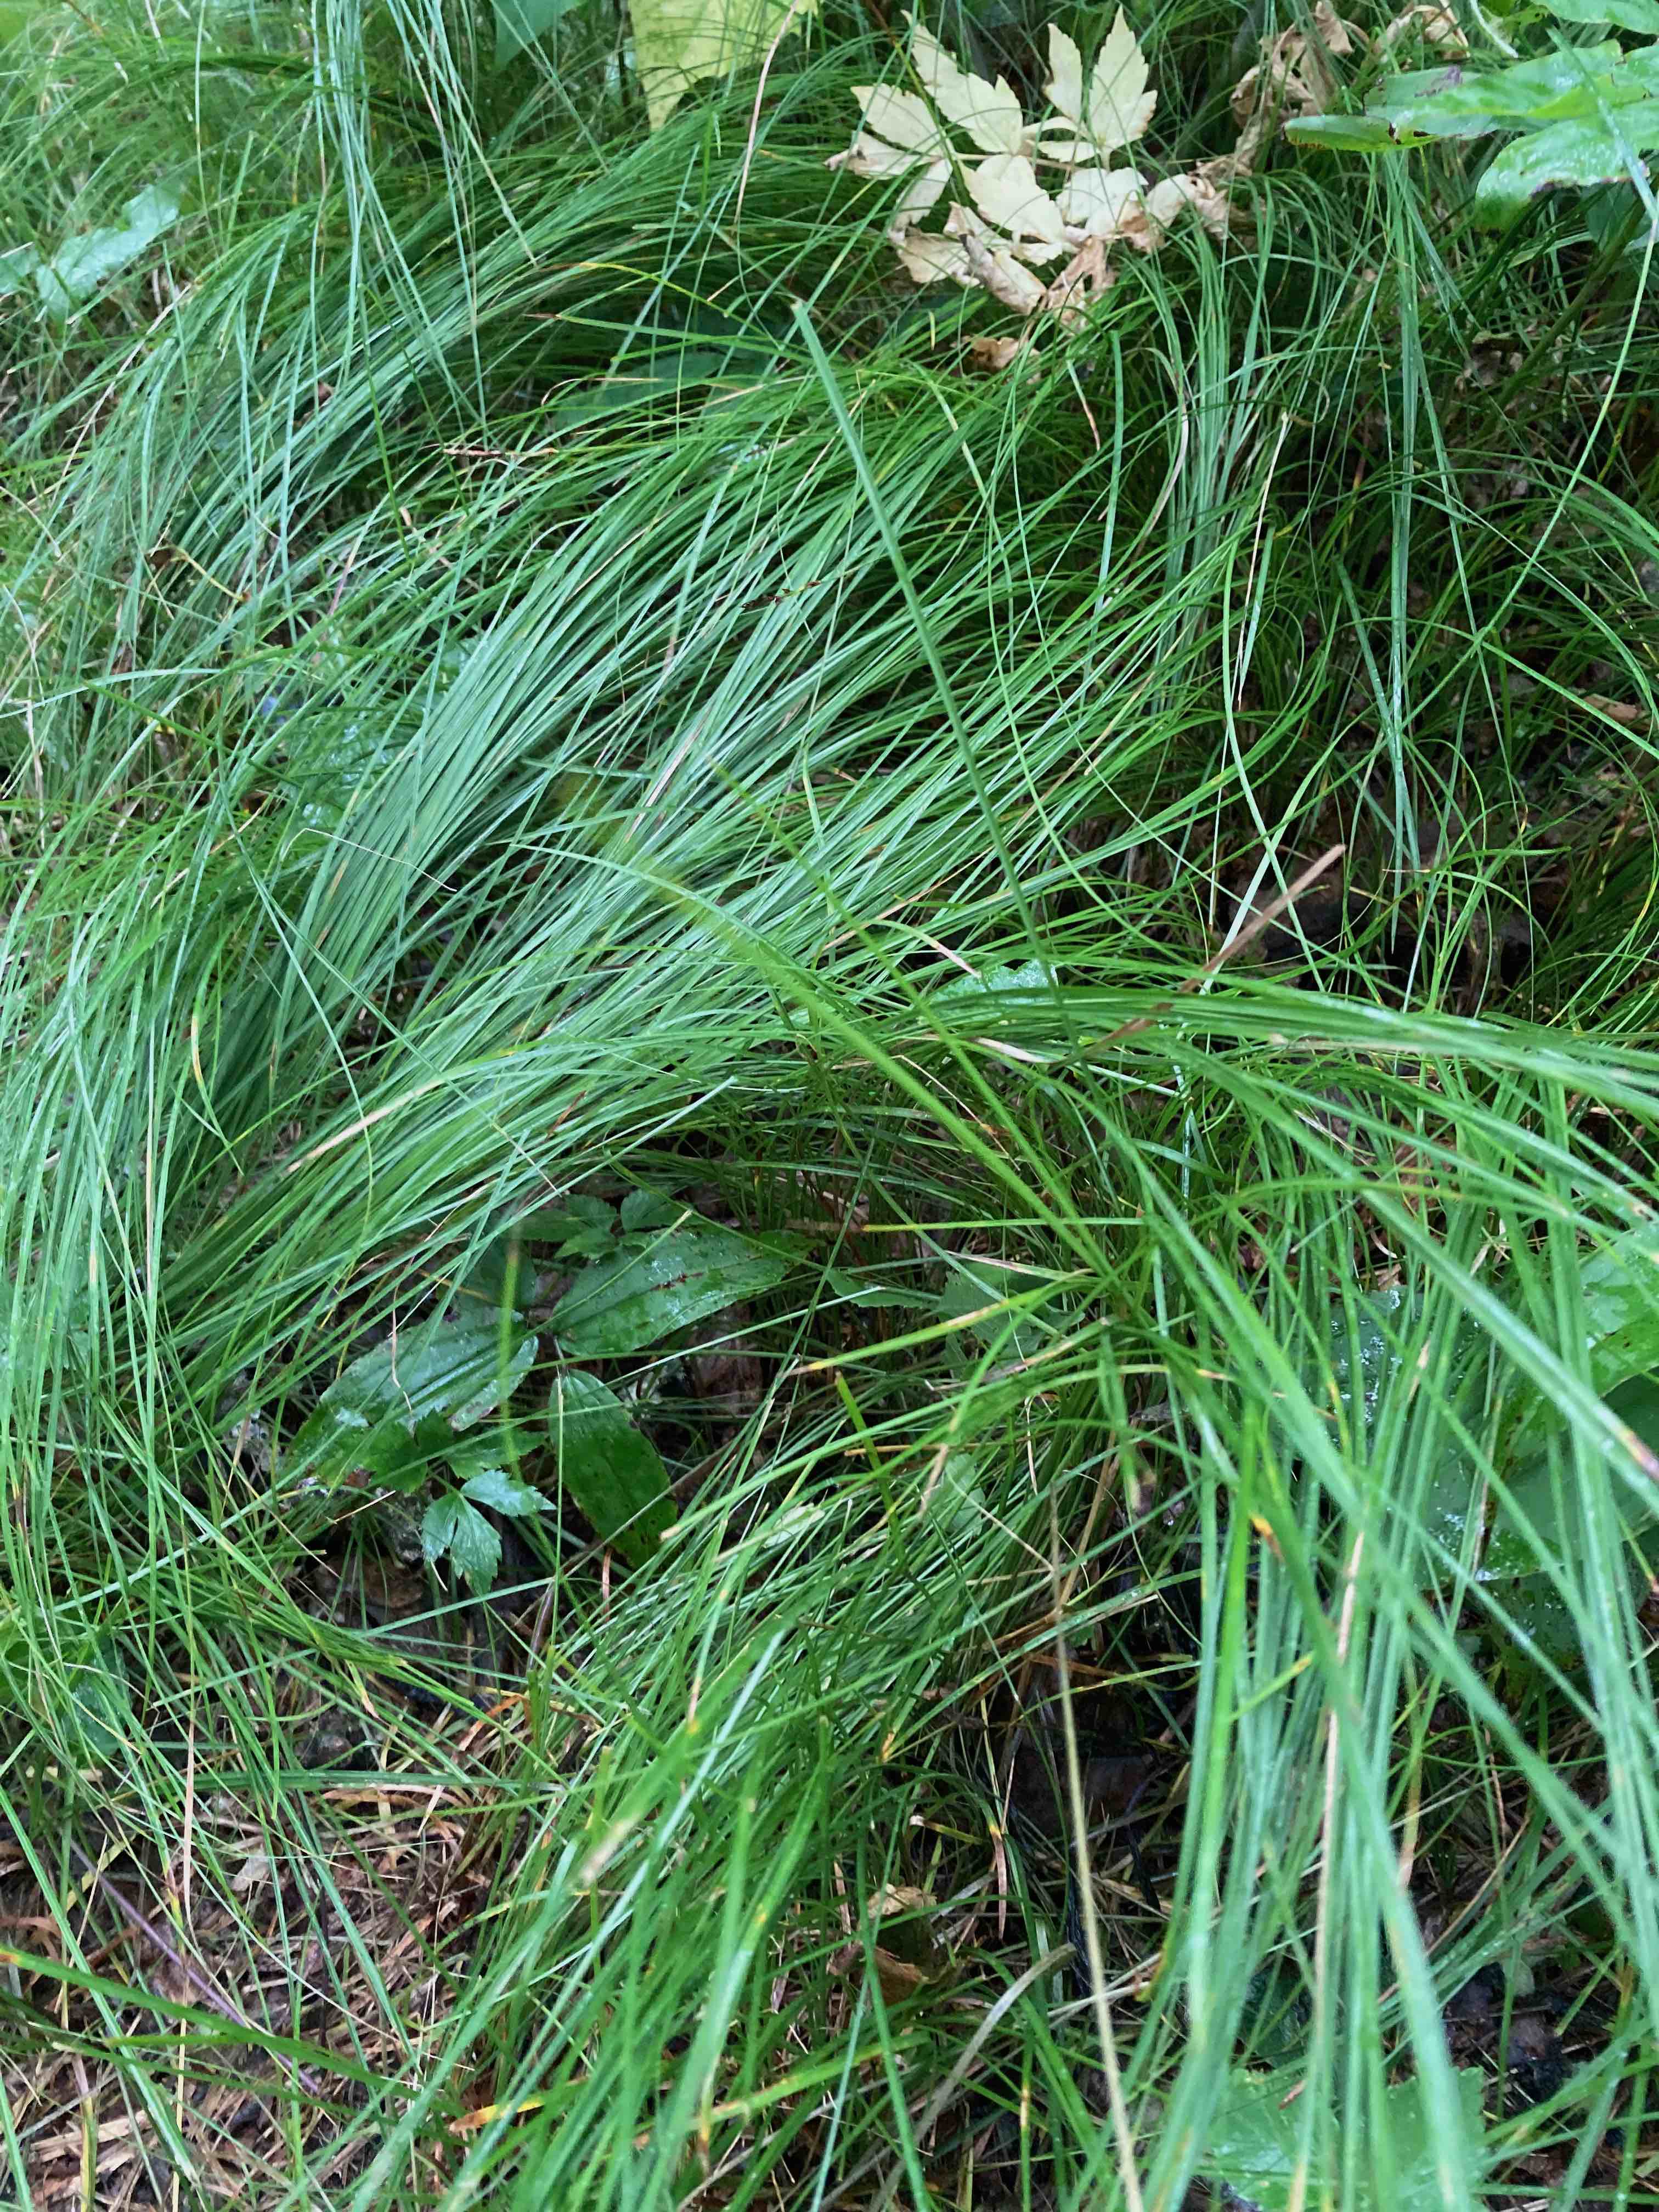 The Scientific Name is Carex pensylvanica. You will likely hear them called Pennsylvania Sedge. This picture shows the It grows in loose colonies in shady areas and has a creeping habit. of Carex pensylvanica